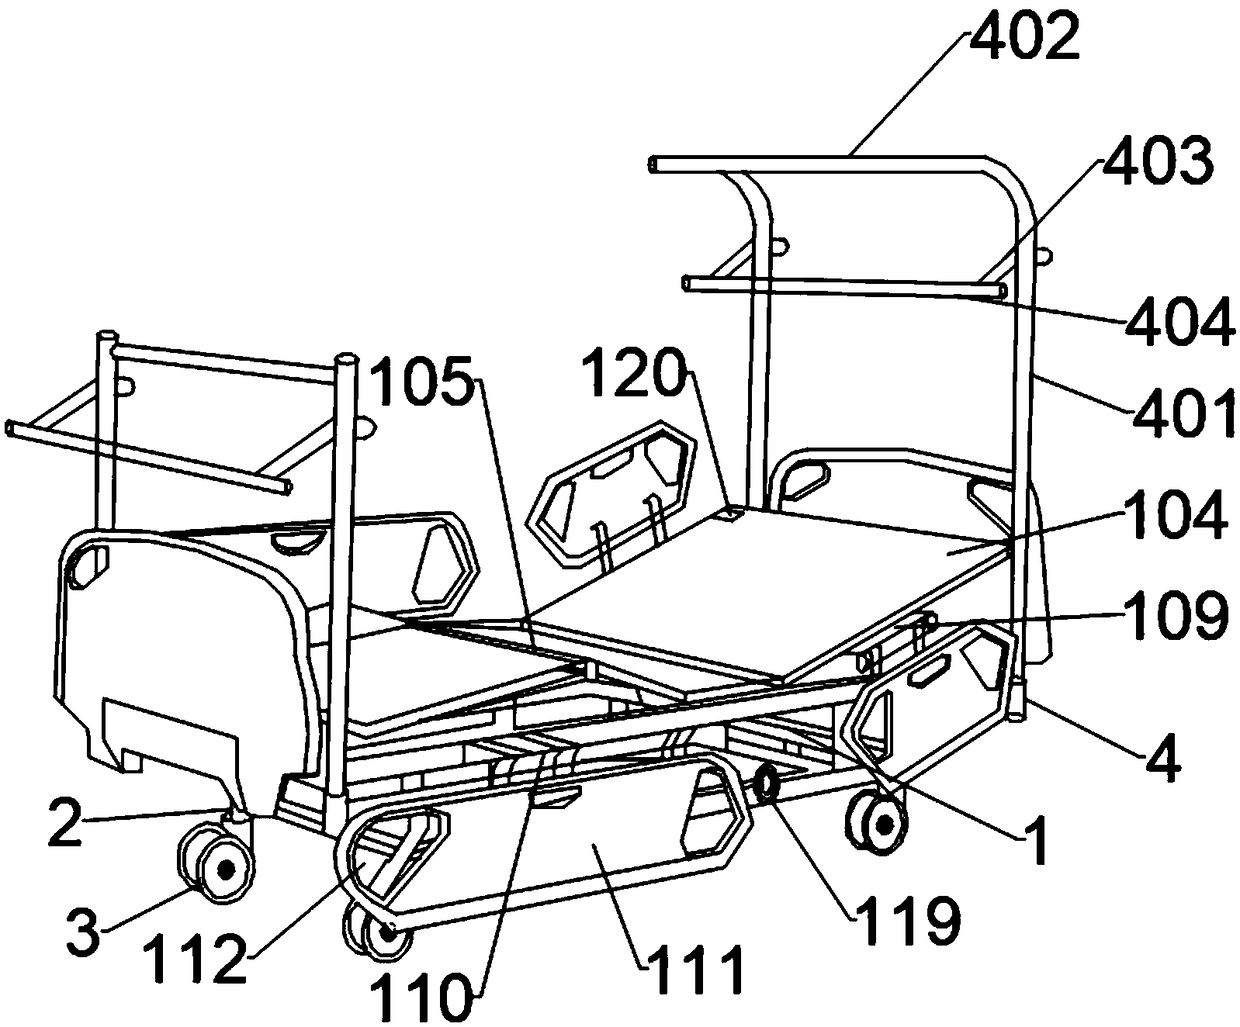 Delivery device for maternity nursing bed